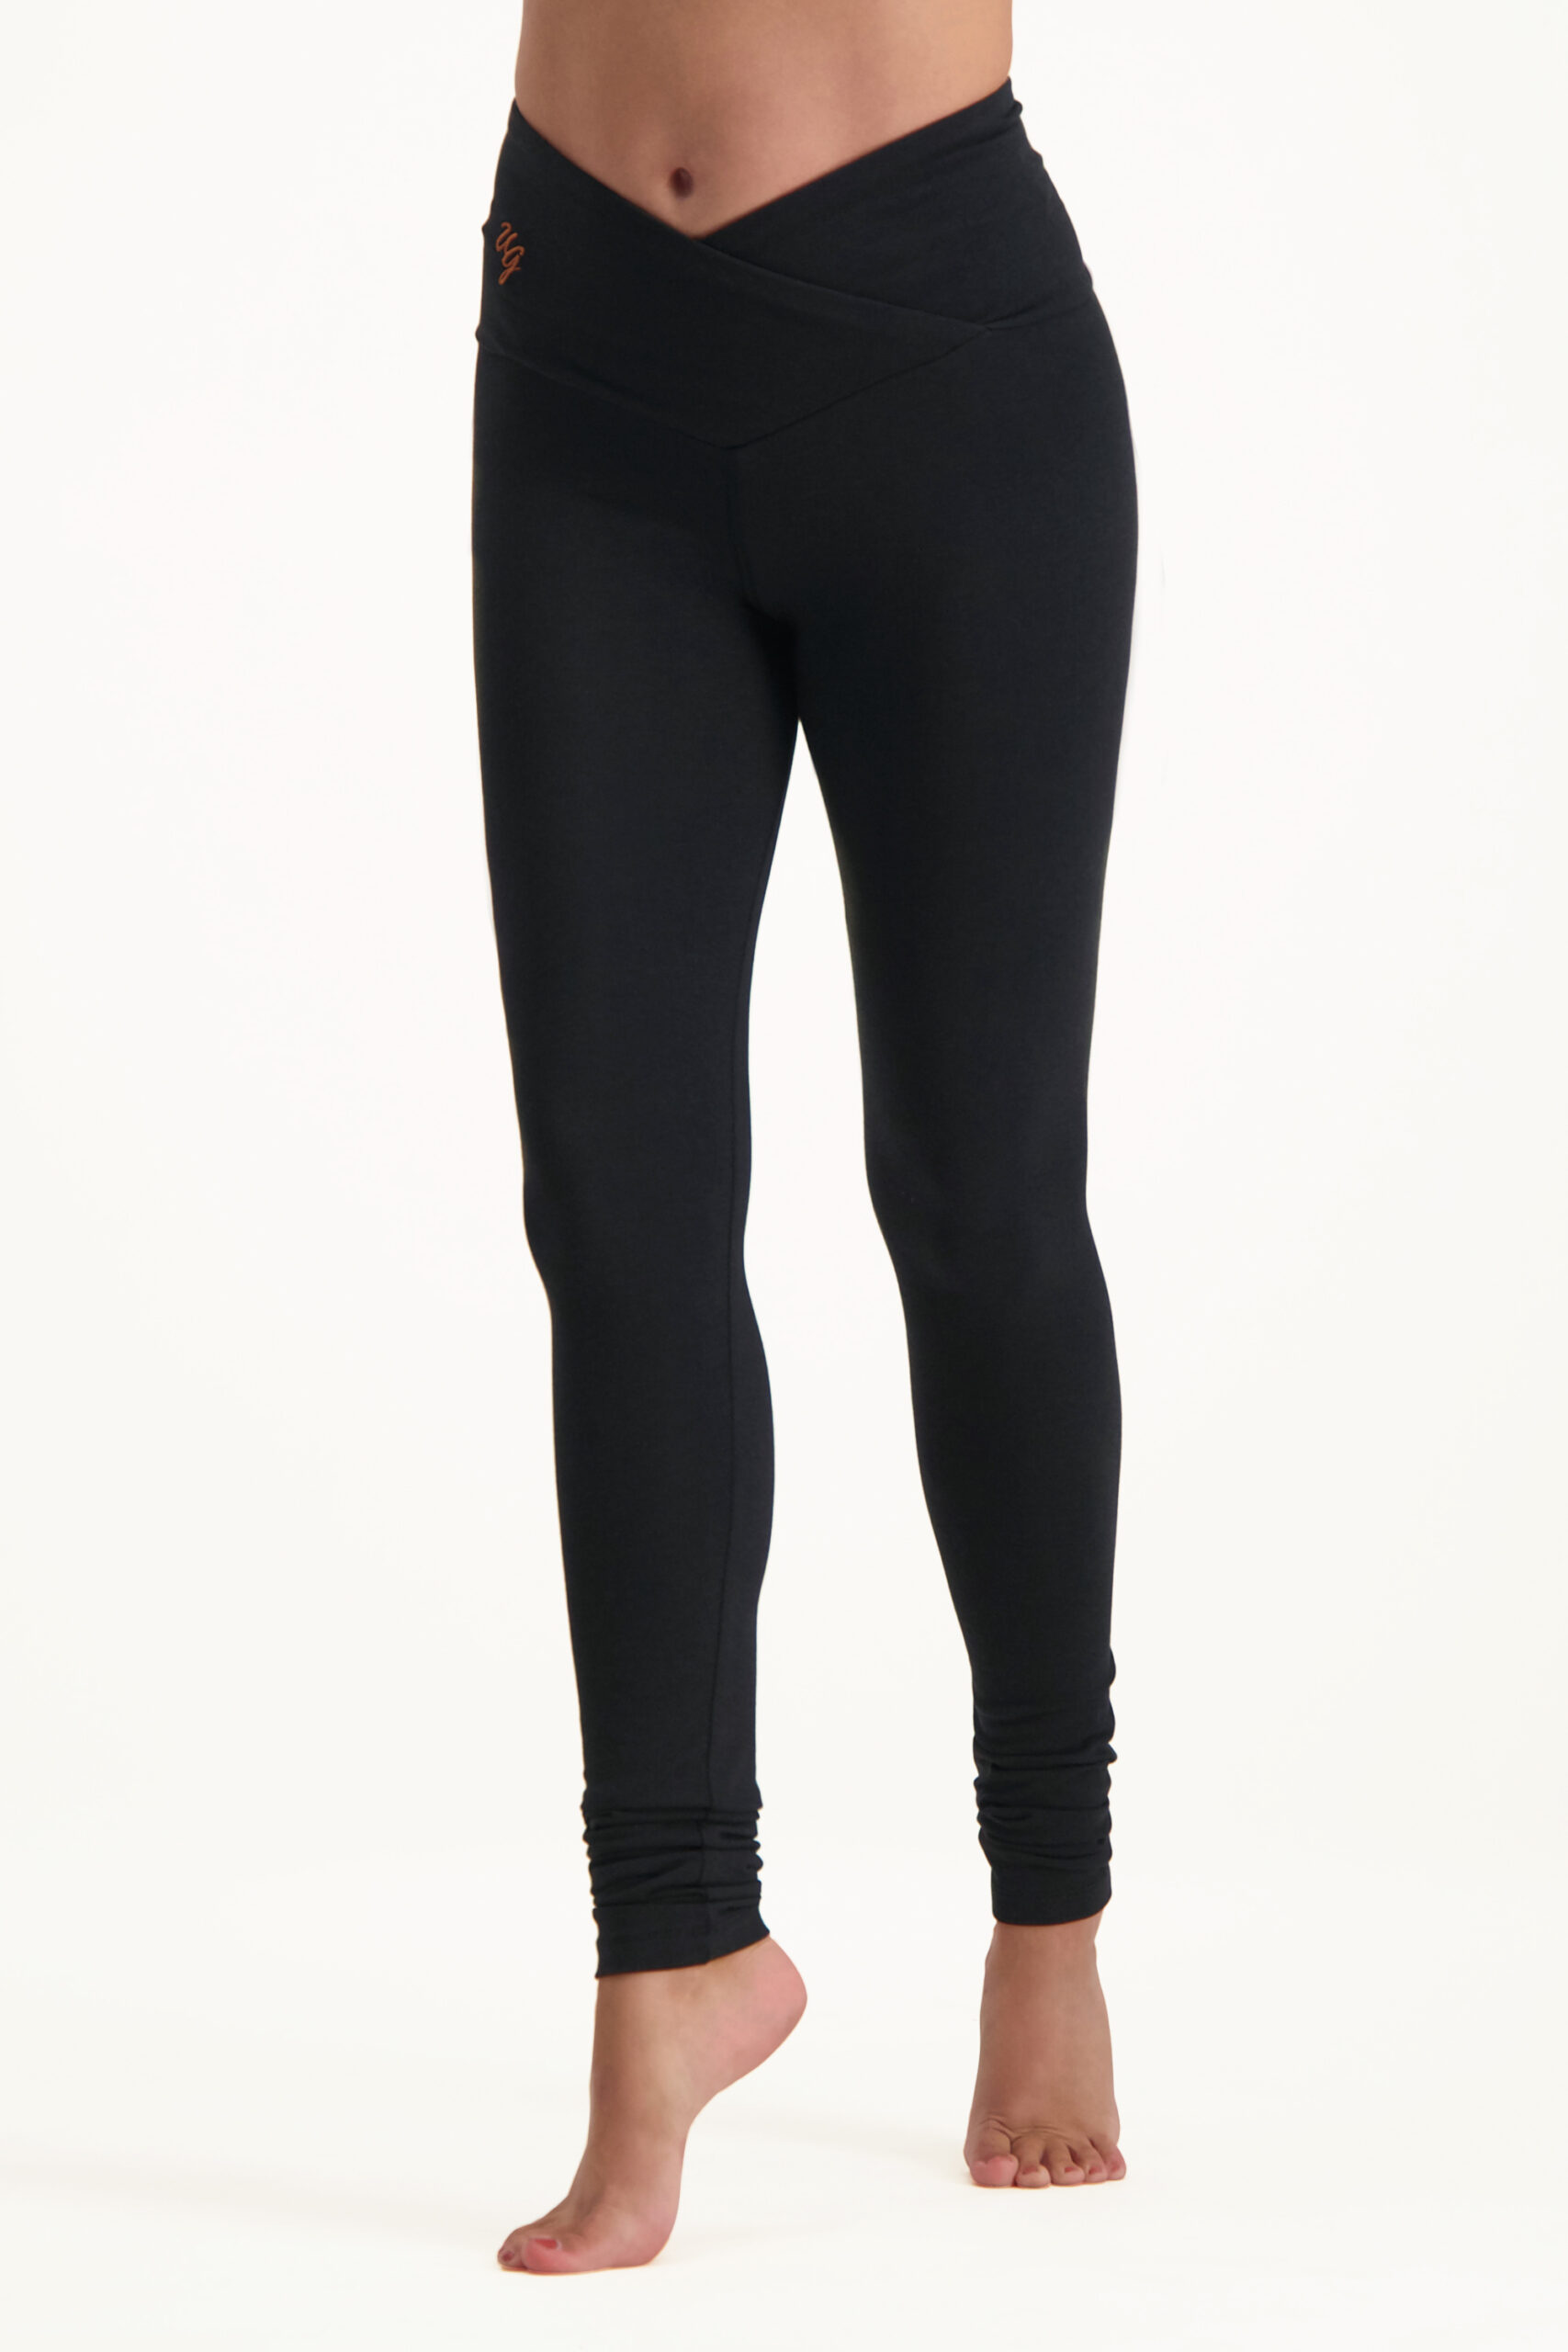 Spun Bamboo Women's Bamboo Viscose Full Length Legging - Soft Stretchy  Comfort-Fit Yoga Pants with Hidden Packet Black at Amazon Women's Clothing  store